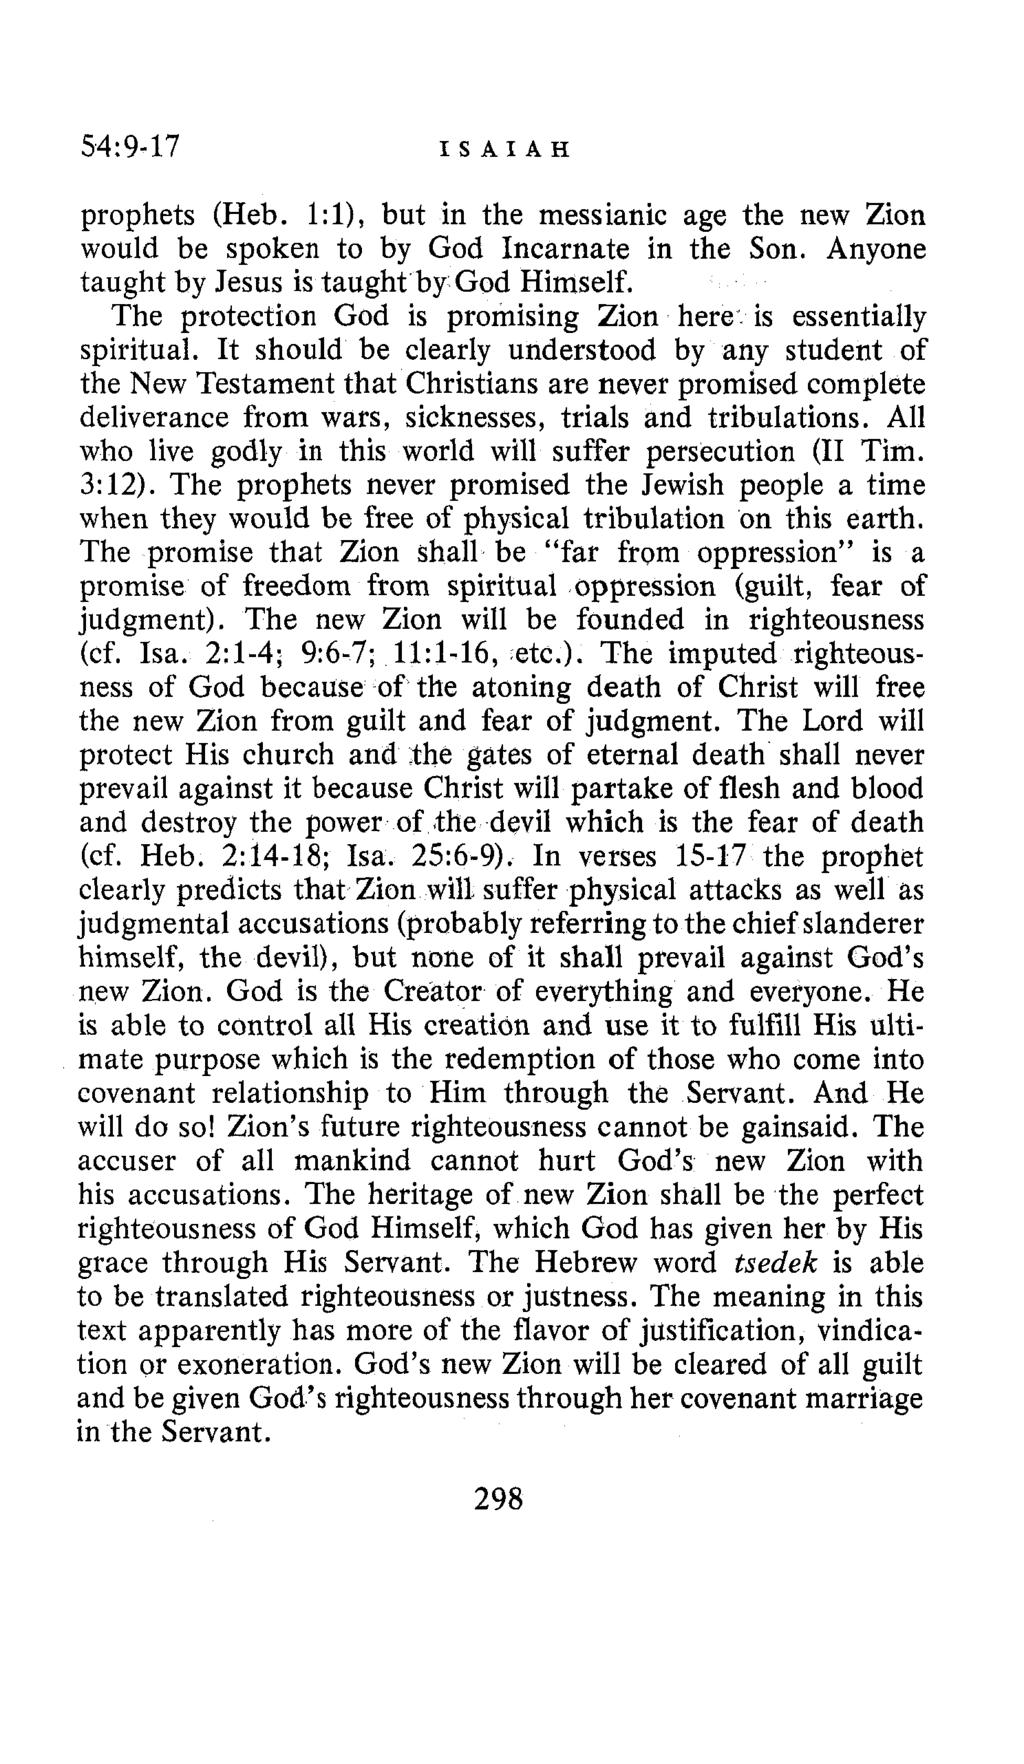 54 : 9-17 ISAIAH prophets (Heb. l:l), but in the messianic age the new Zion would be spoken to by God Incarnate in the Son. Anyone taught by Jesus is taught by God Himself.